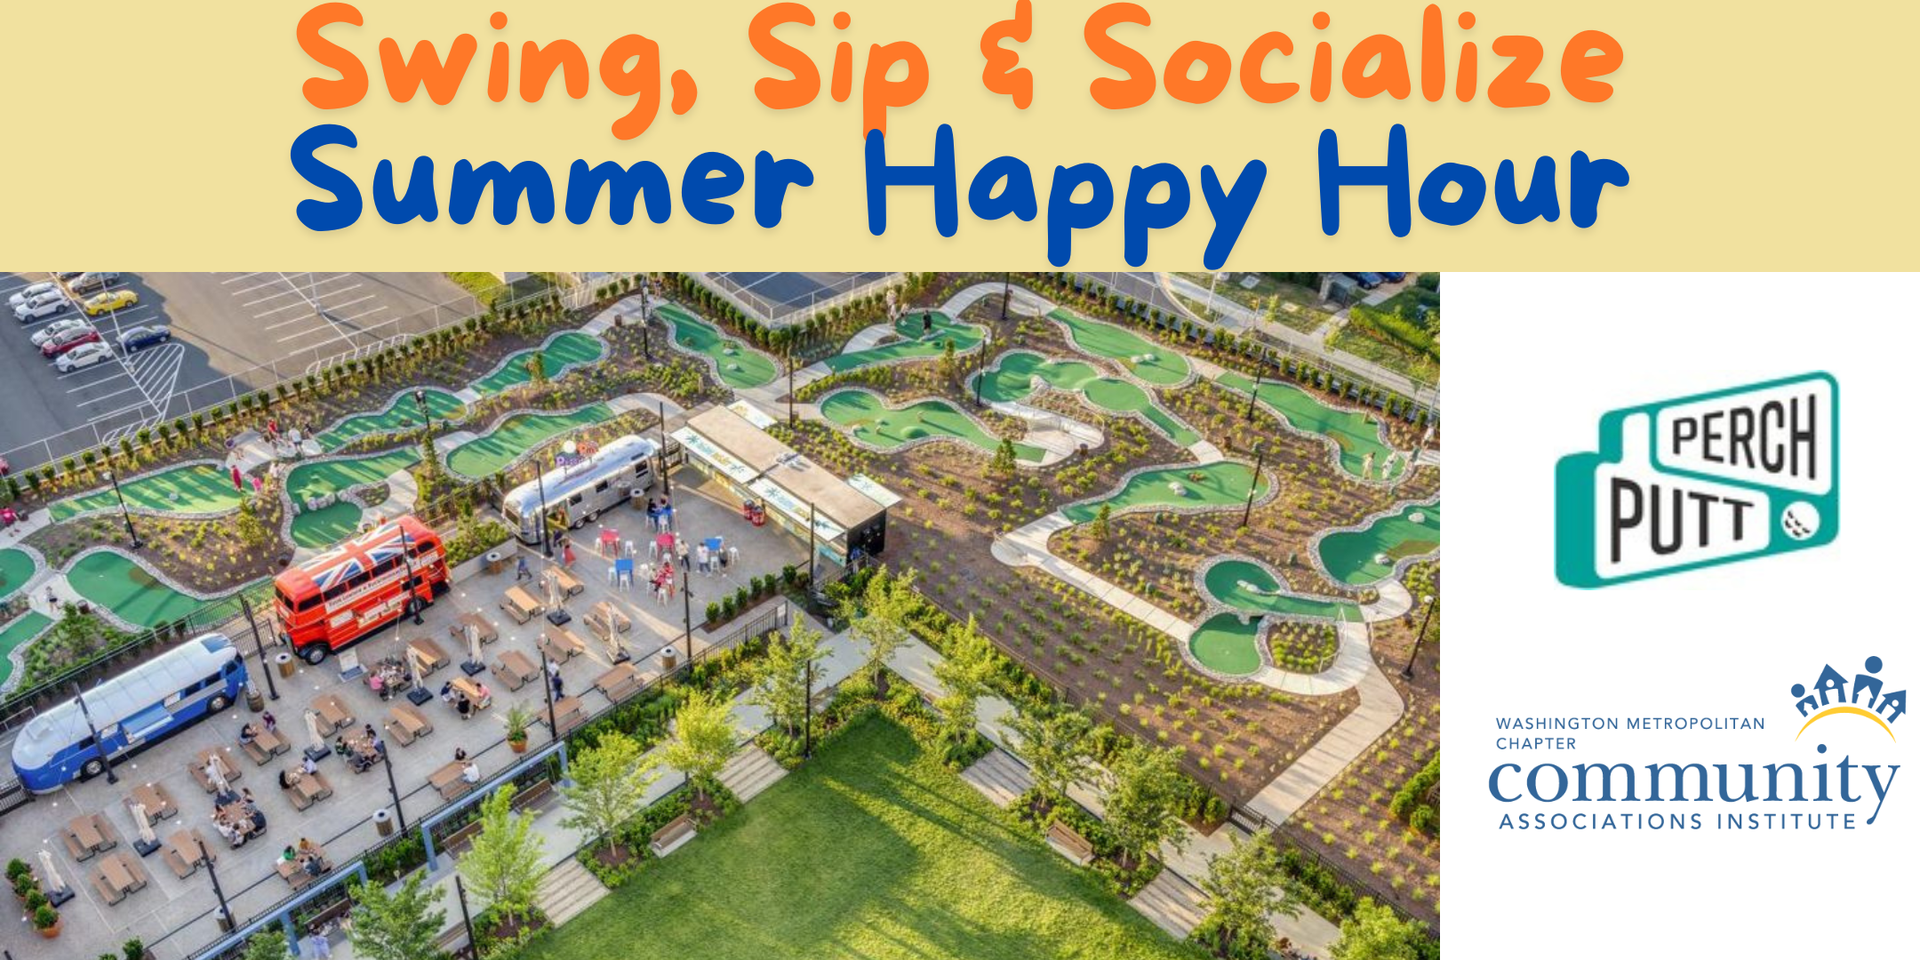 thumbnails Swing, Sip and Socialize with WMCCAI